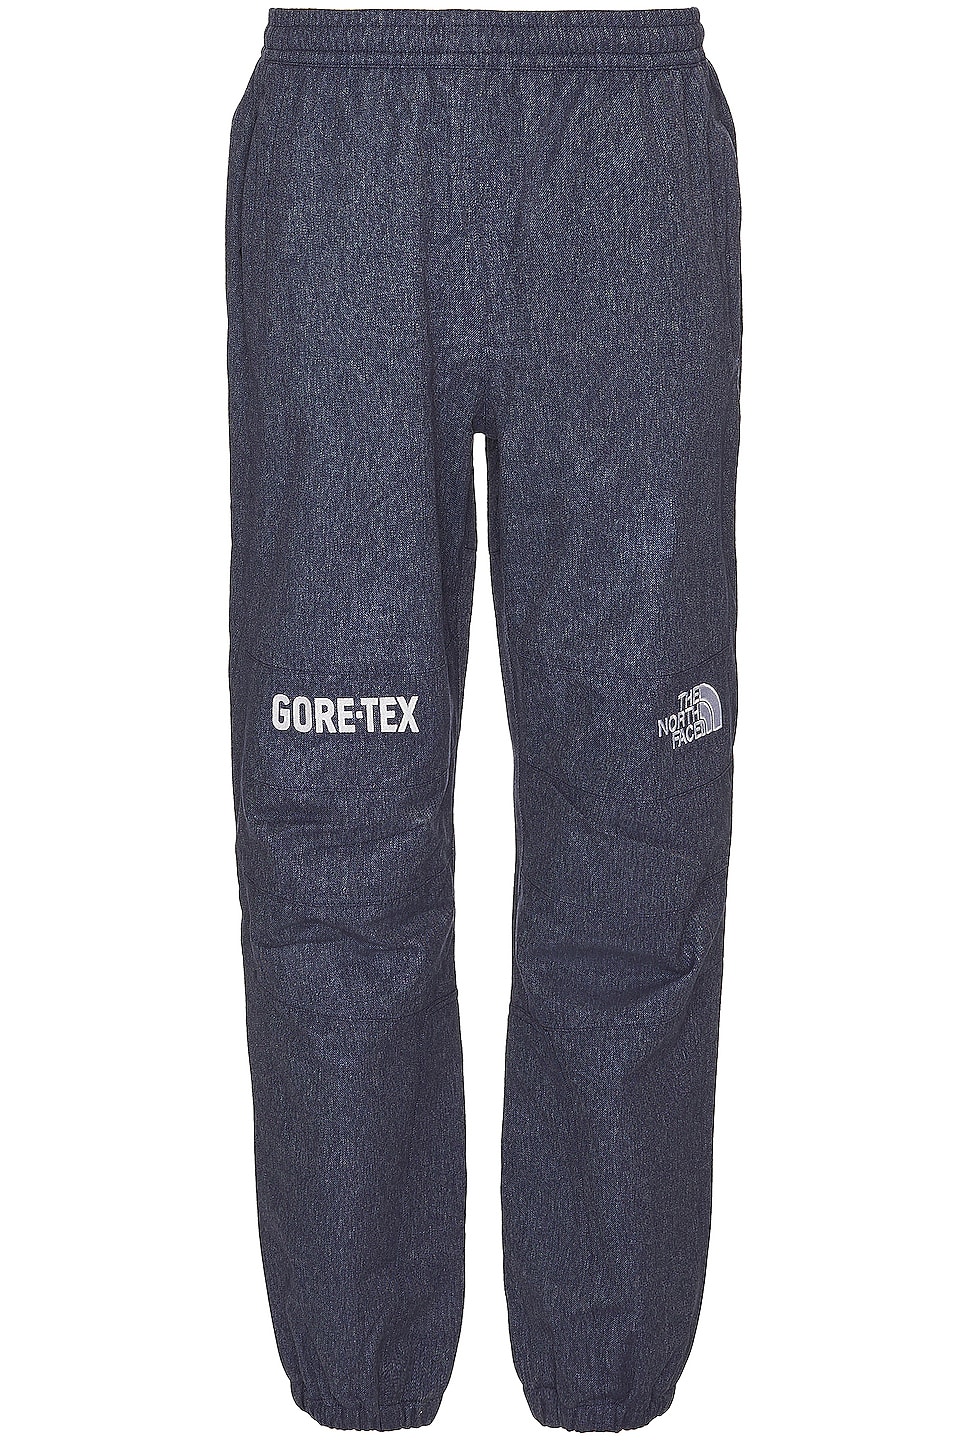 Image 1 of The North Face Gtx Mountain Pants in Denim Blue & Tnf Black